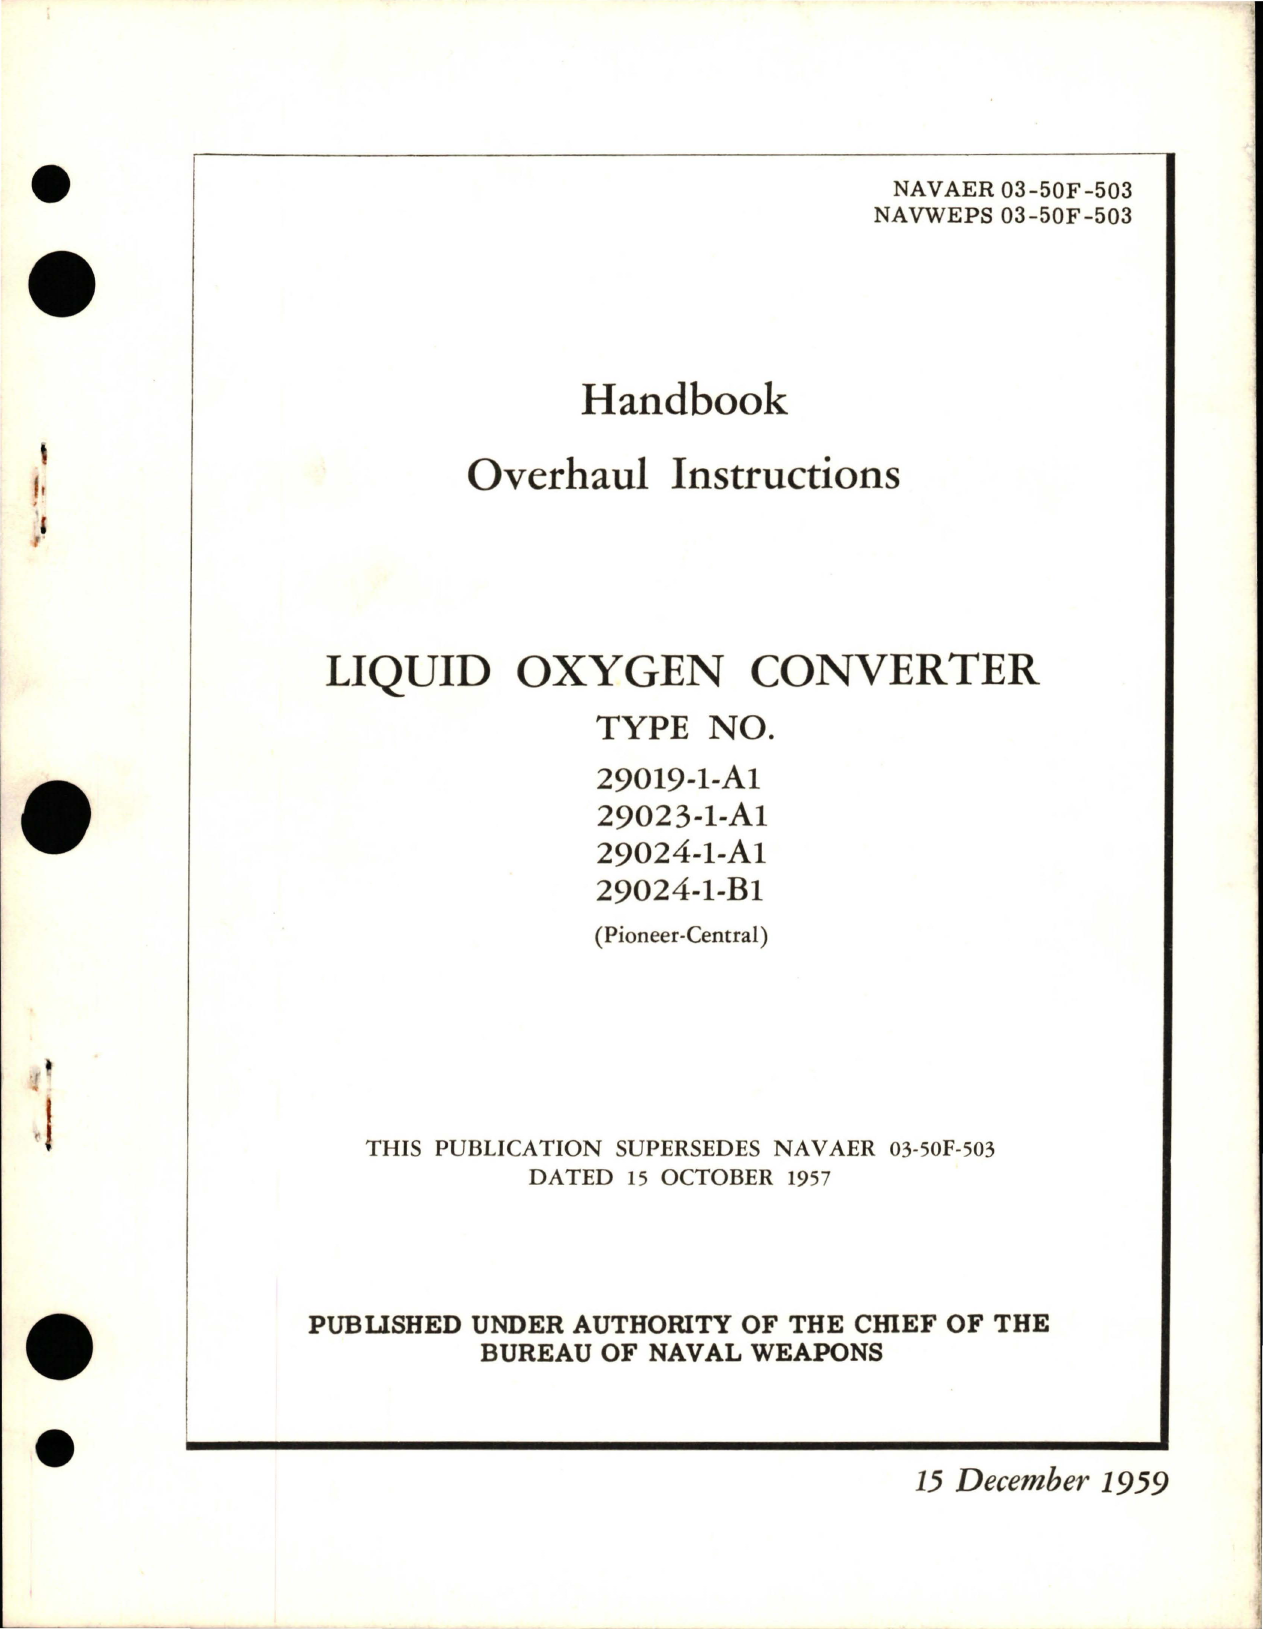 Sample page 1 from AirCorps Library document: Overhaul Instructions for Liquid Oxygen Converter - Types 29019-1-A1, 29023-1-A1, 29024-1-A1, and 29024-1-B1